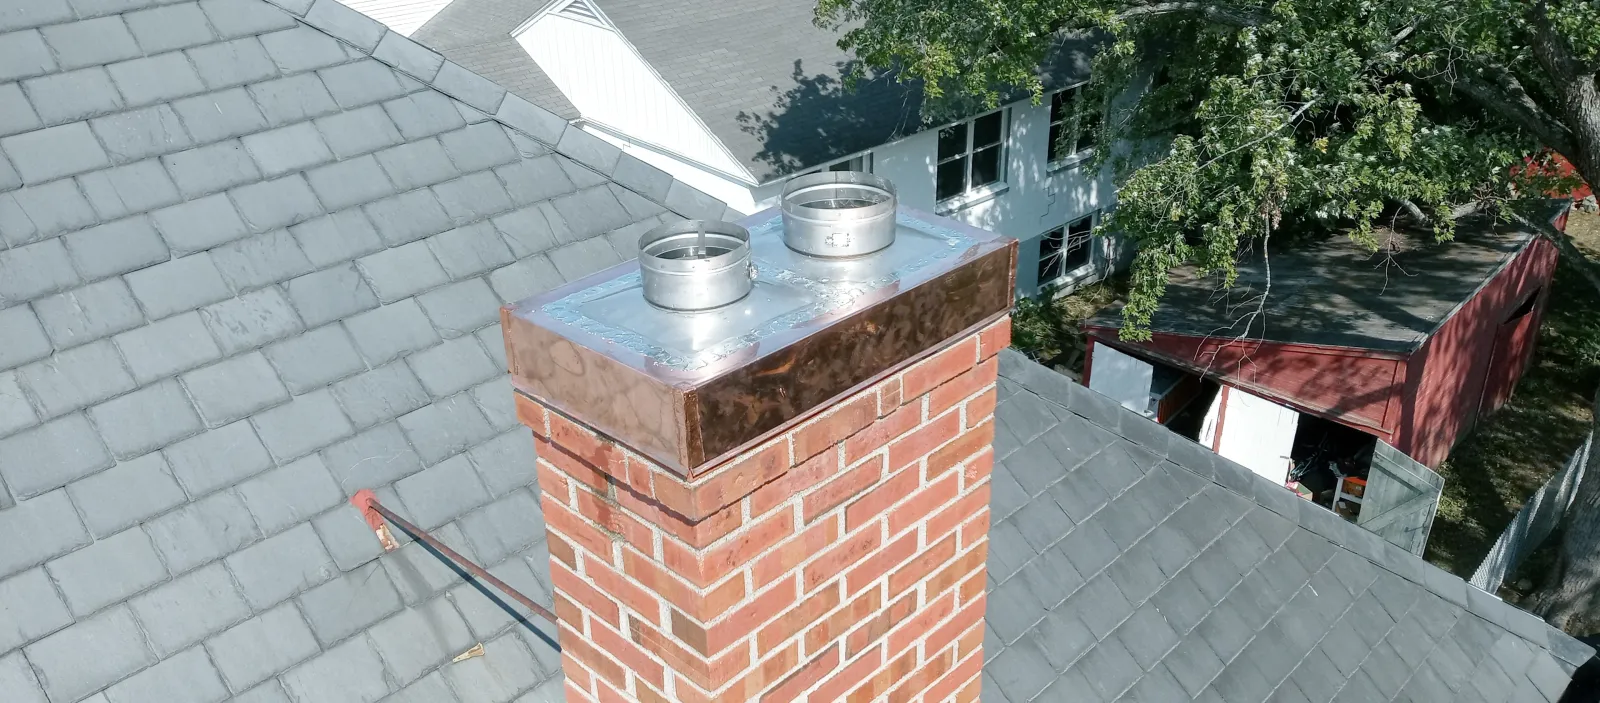 a roof with a chimney and a pot on it